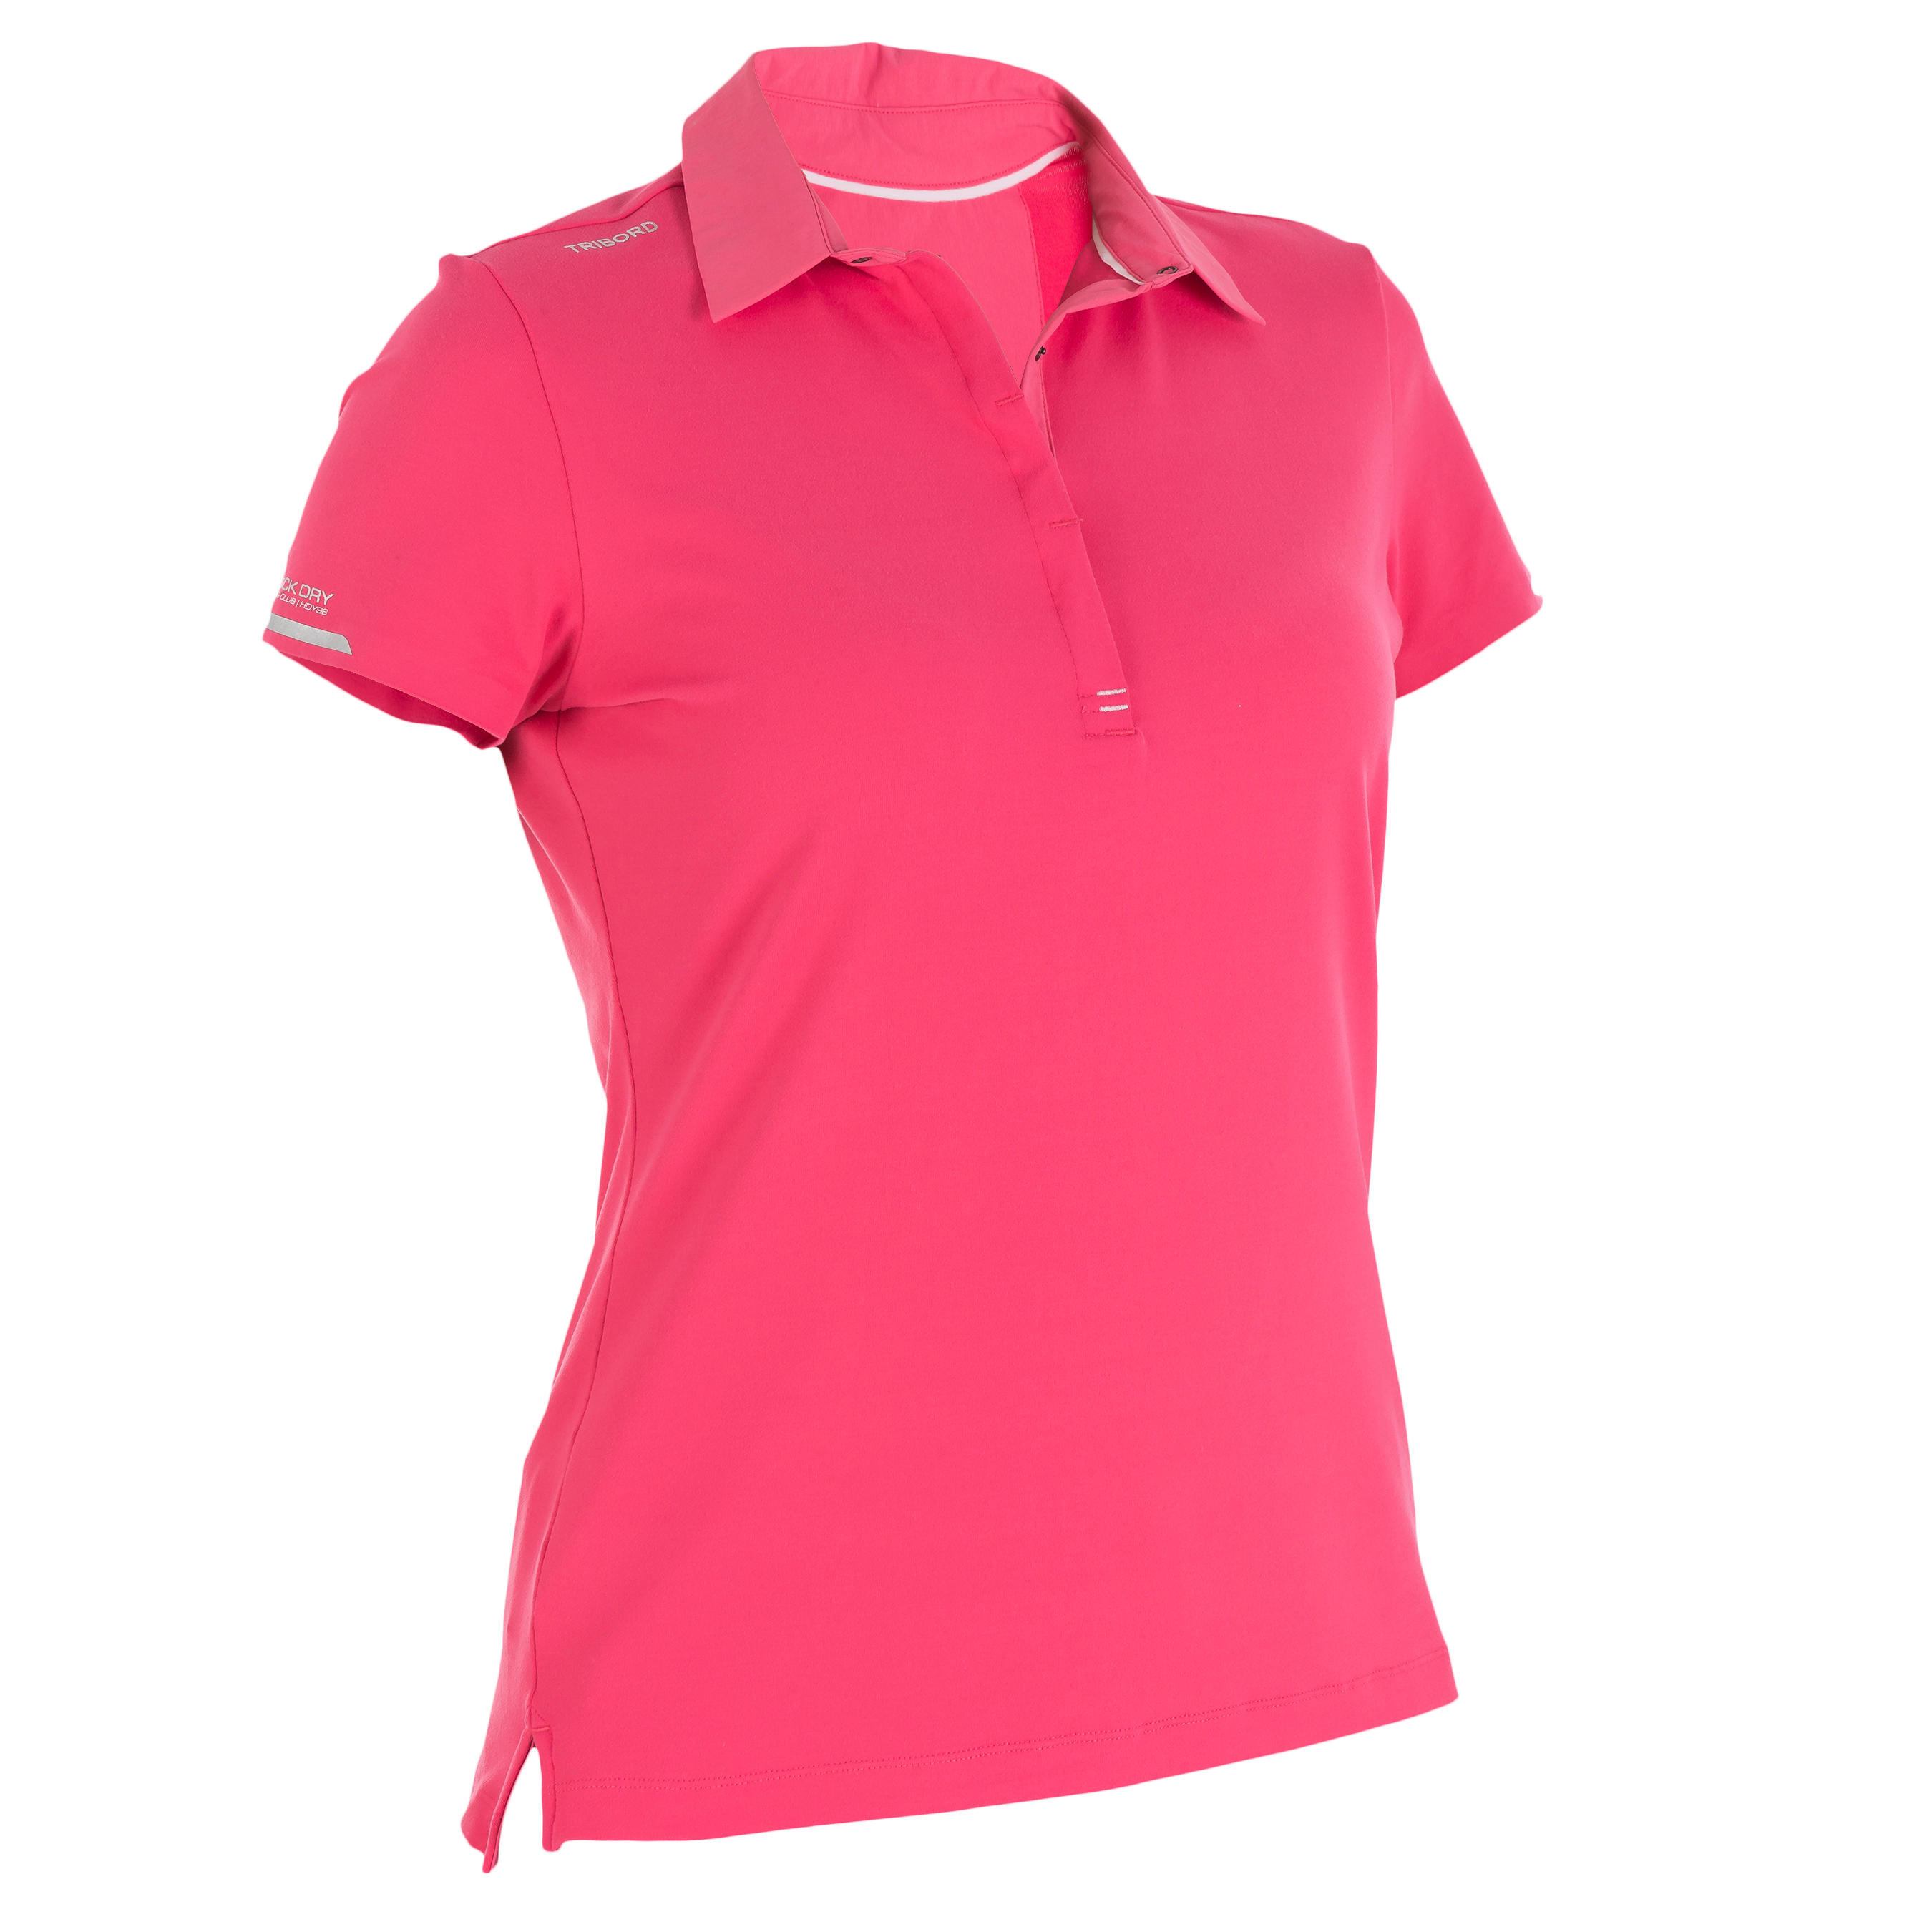 TRIBORD Women's Race short-sleeved sailing polo shirt pink